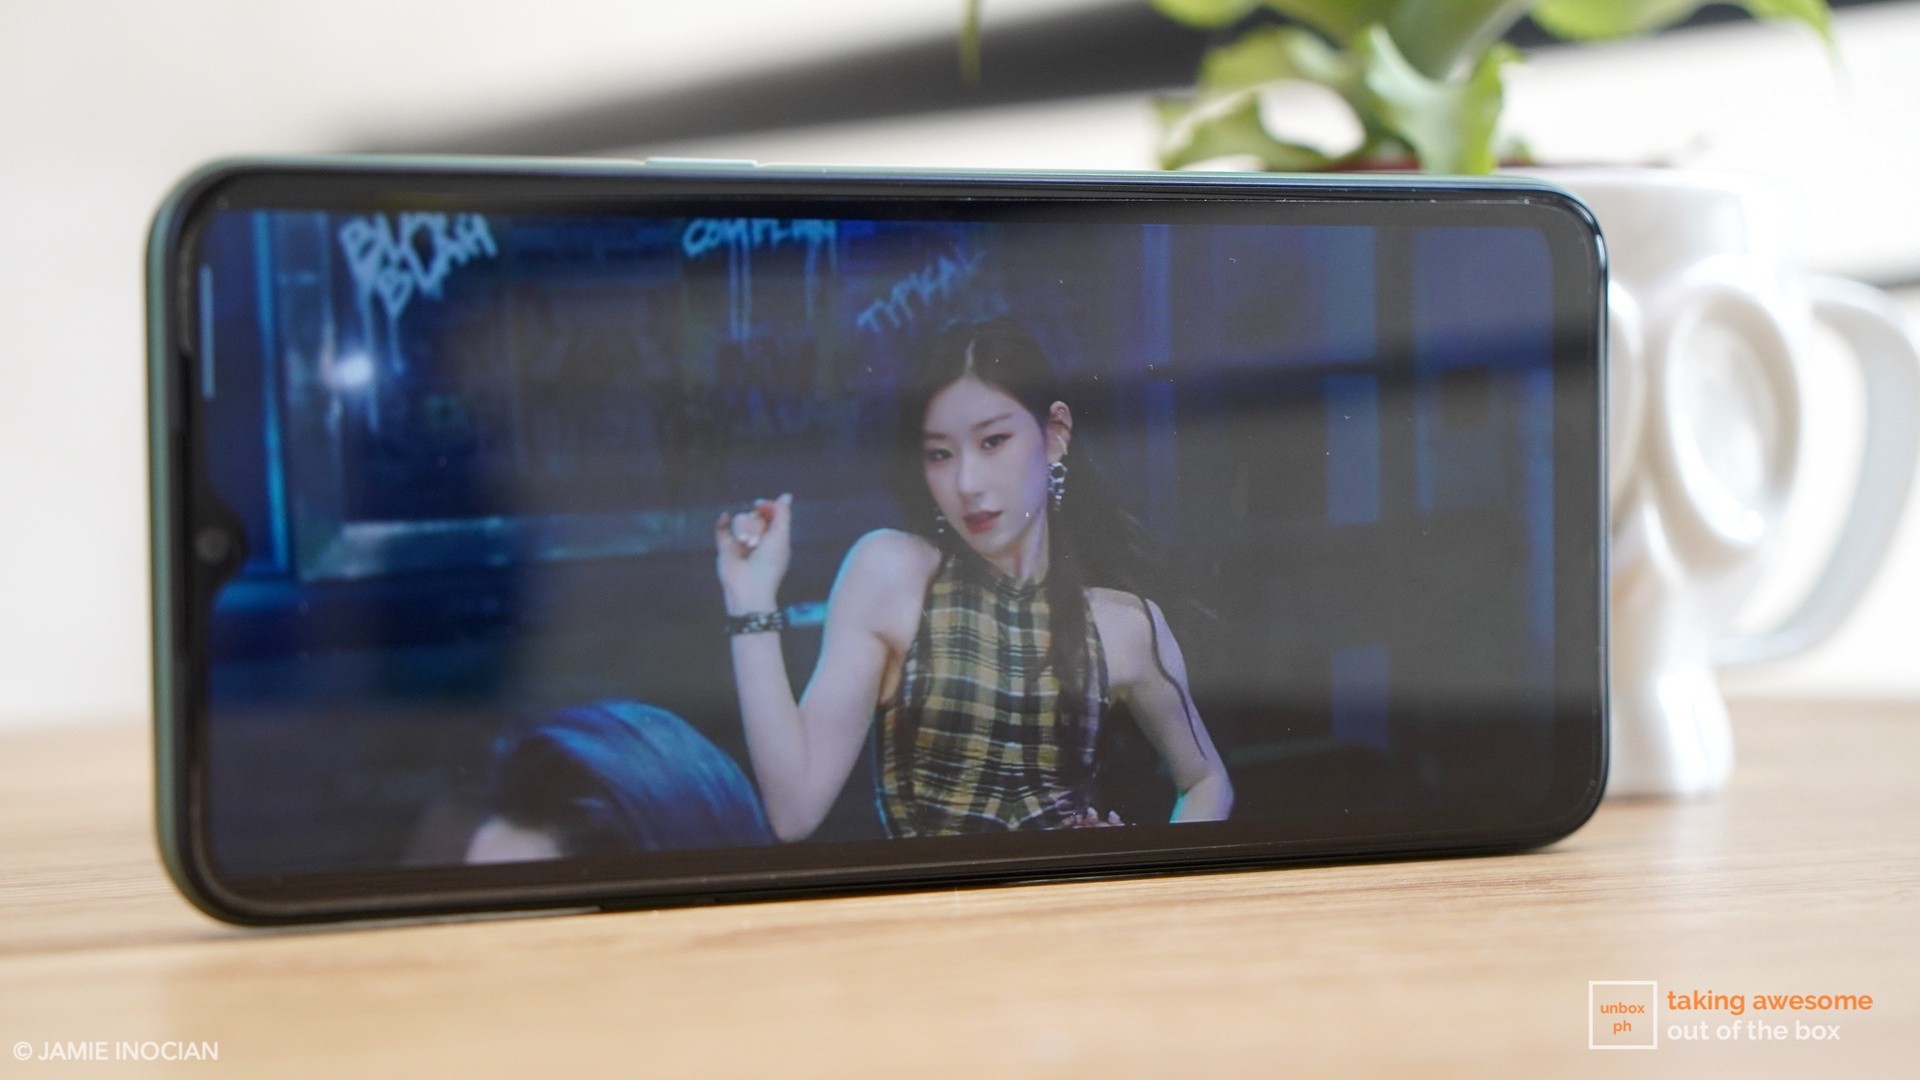 music video played on the realme 6i